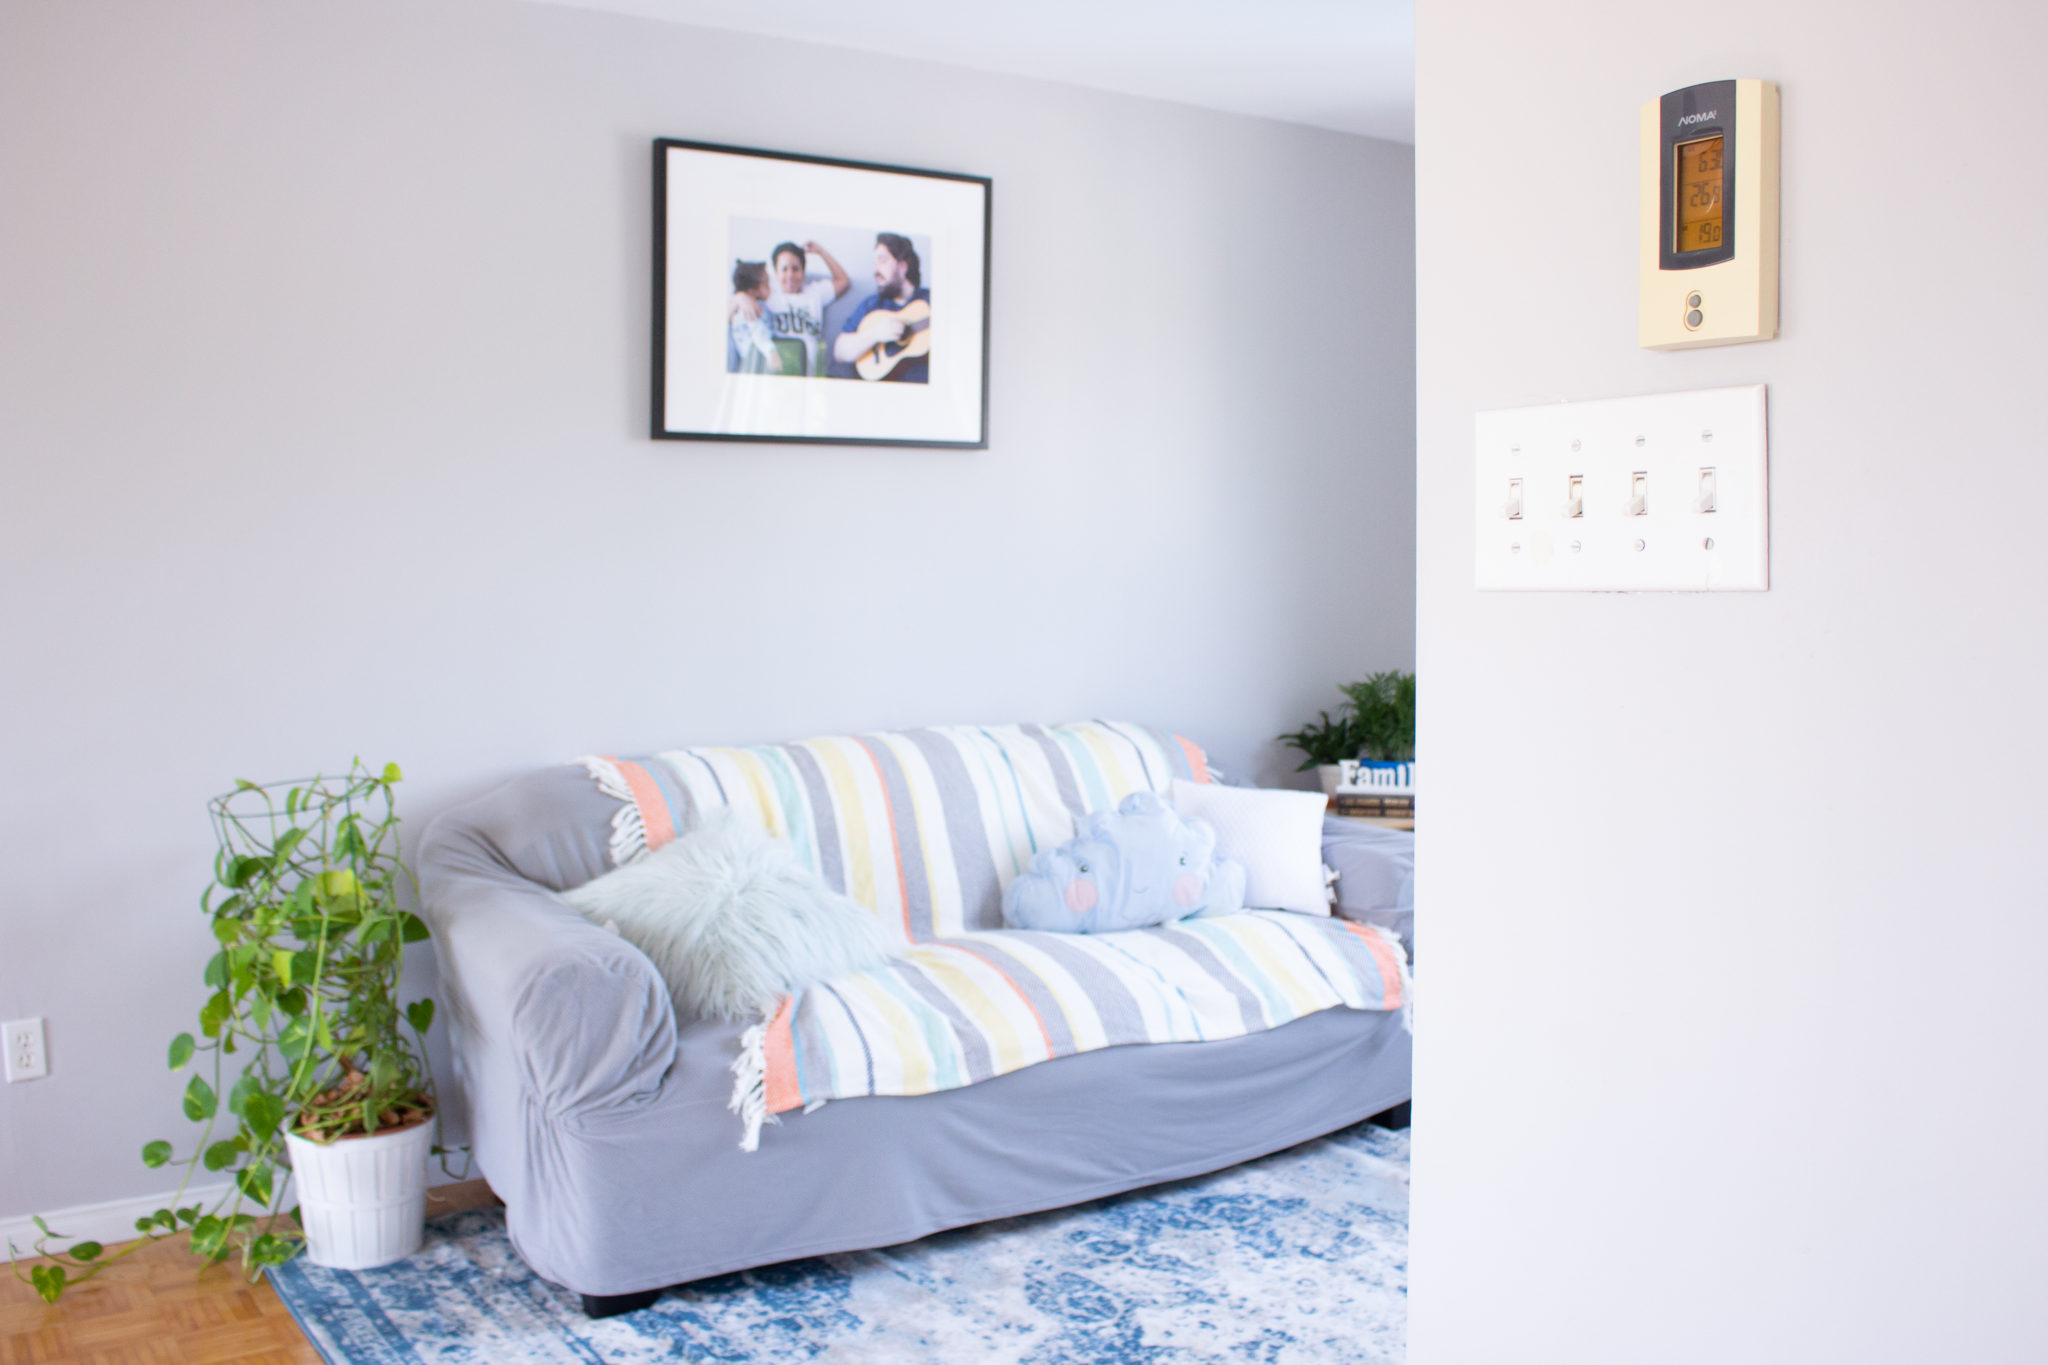 Small Decor Changes That Can Transform A Room